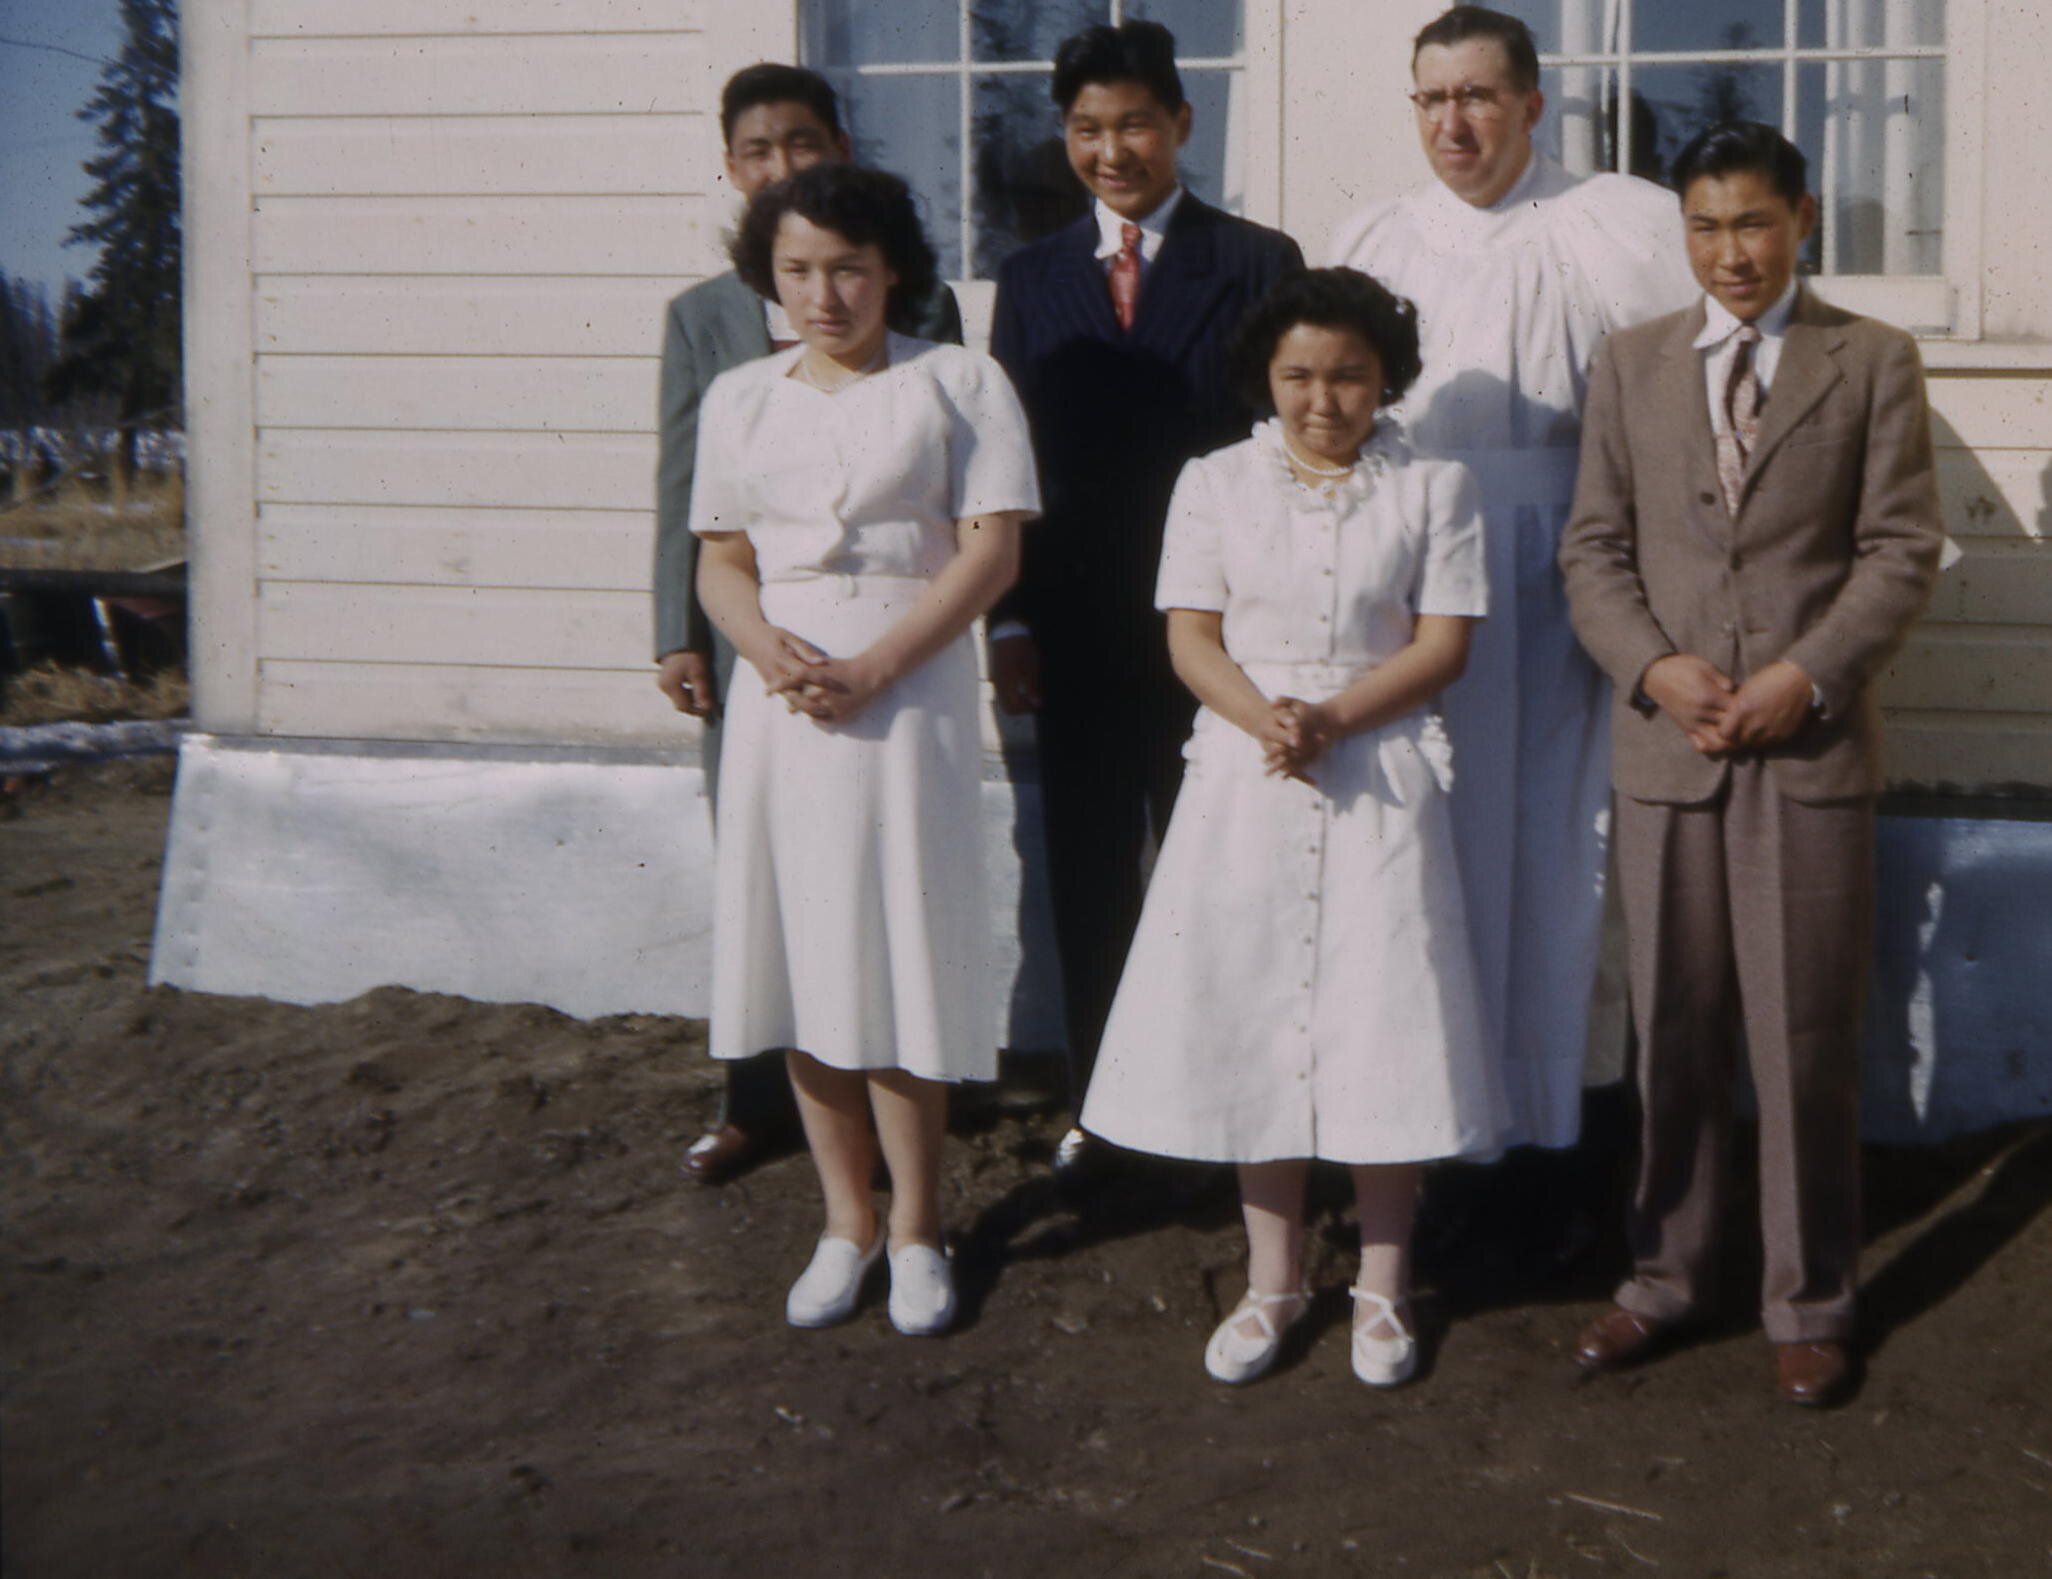  1954 Confirmation Class. Photo on loan from the Henkelman Archives. 